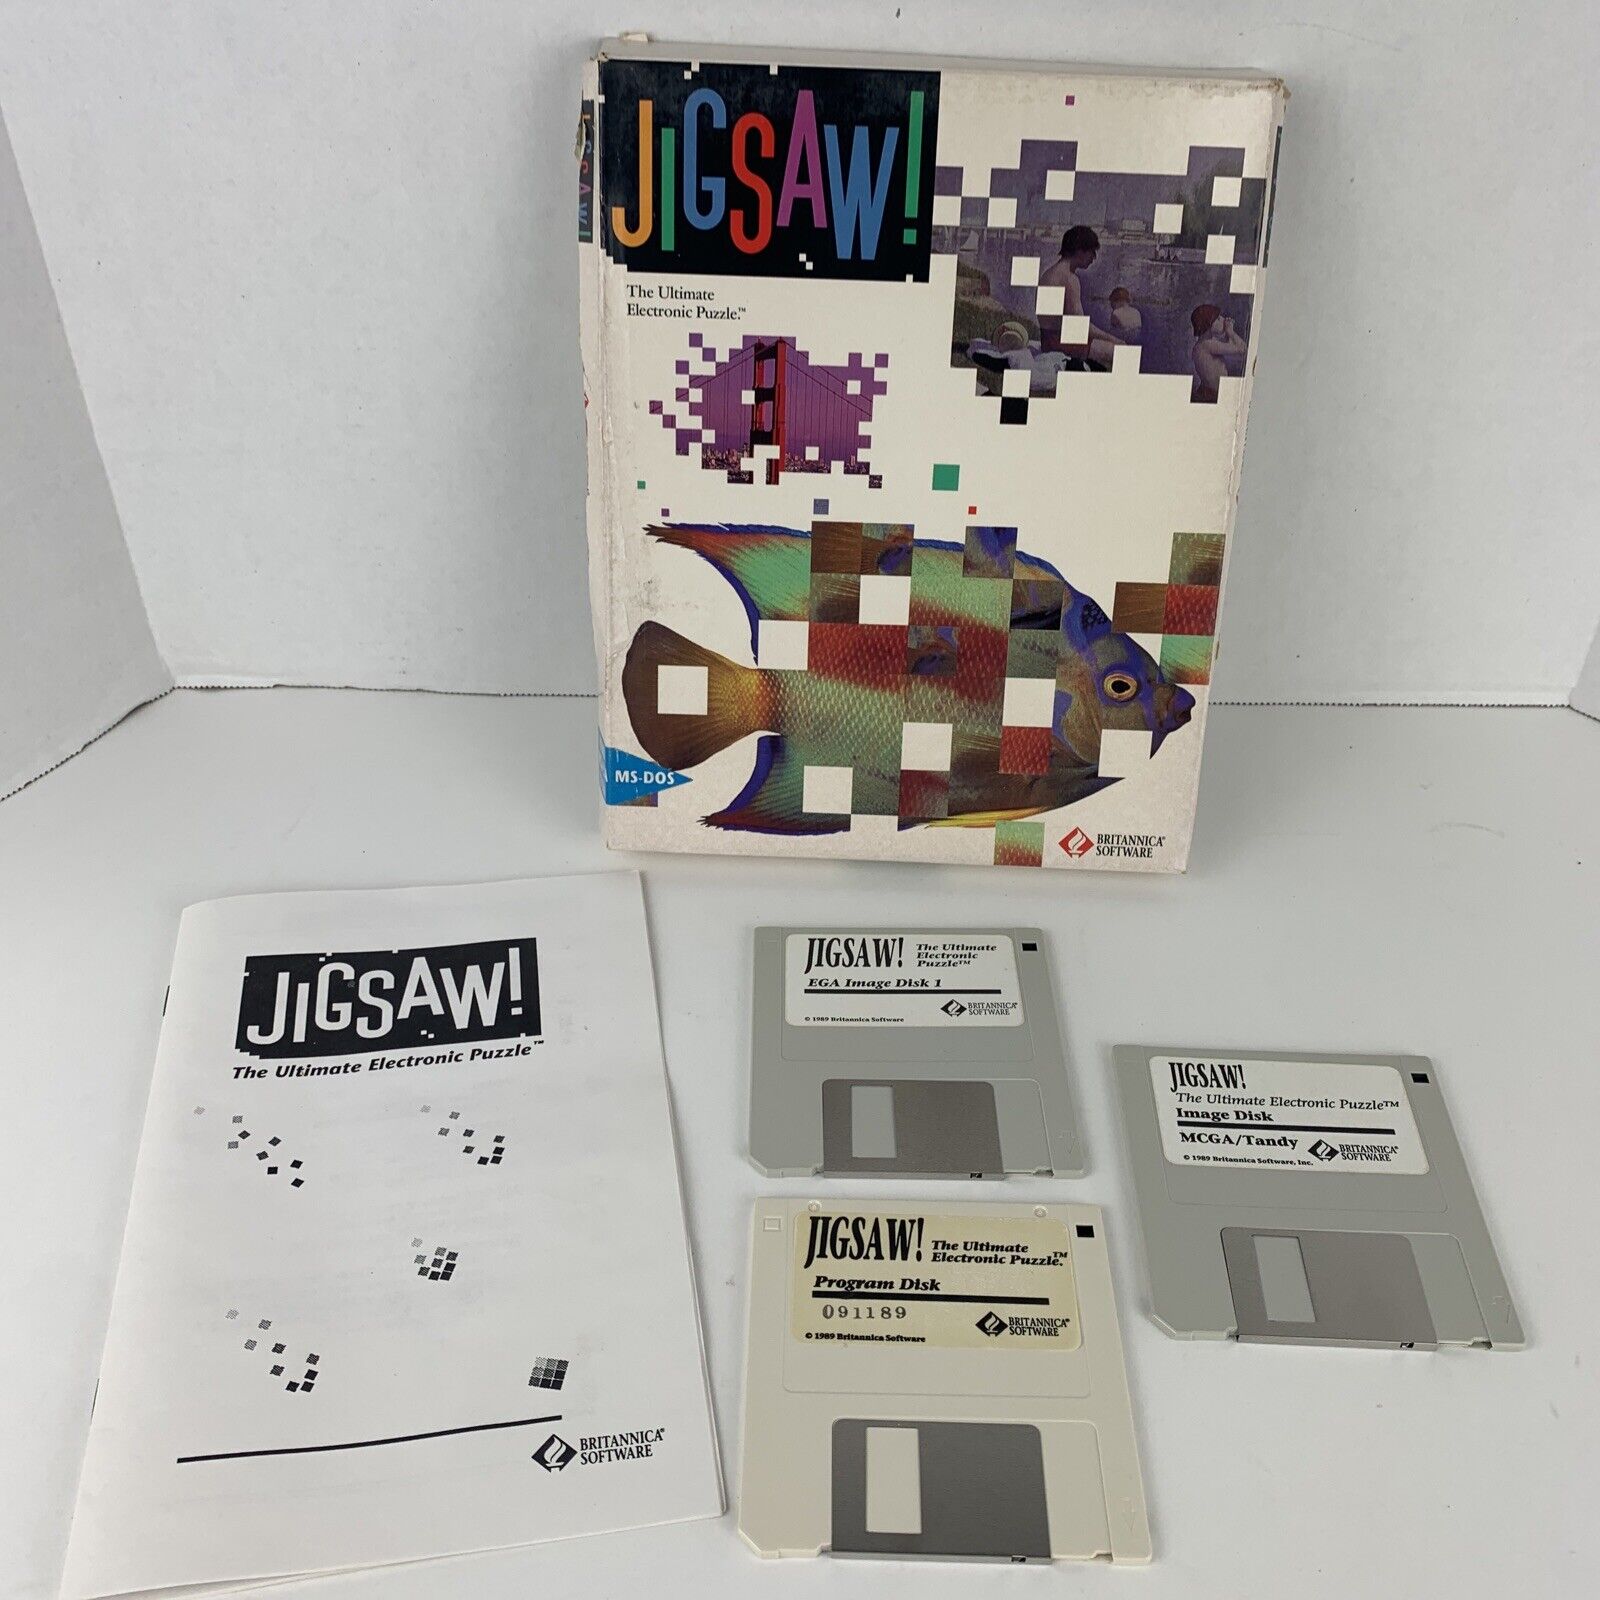 Jigsaw The Ultimate Electronic Puzzle 1989 3.5” IBM PC DOS Tandy Software